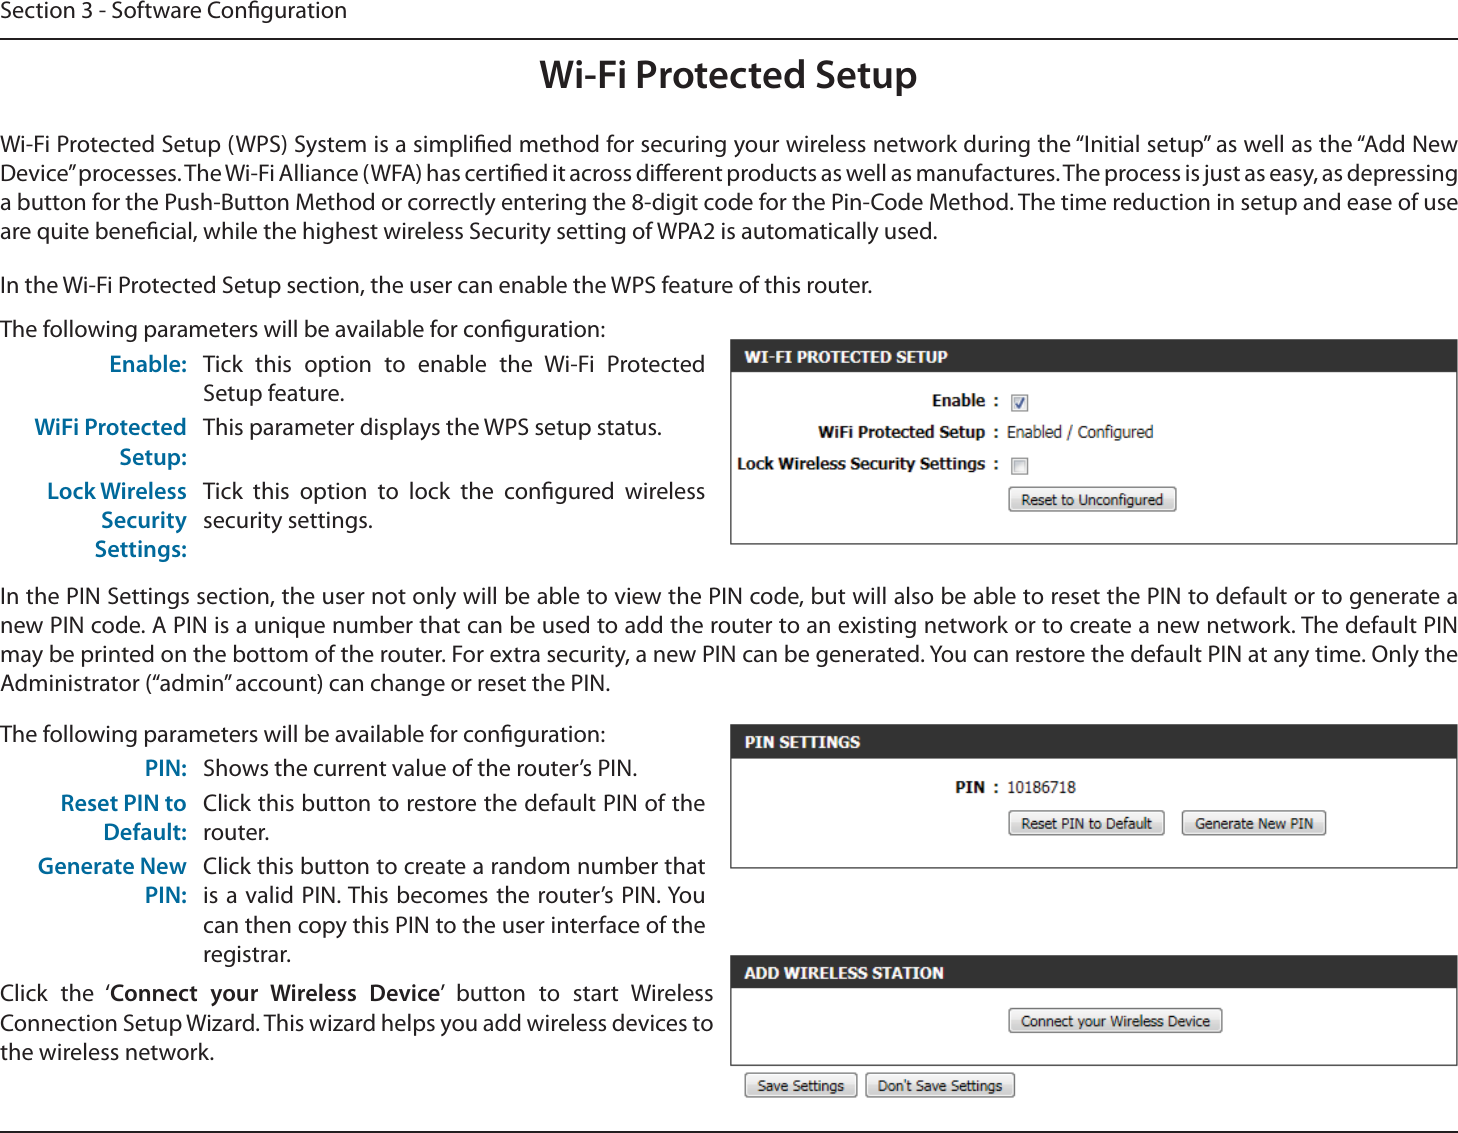 Section 3 - Software CongurationWi-Fi Protected SetupWi-Fi Protected Setup (WPS) System is a simplied method for securing your wireless network during the “Initial setup” as well as the “Add New Device” processes. The Wi-Fi Alliance (WFA) has certied it across dierent products as well as manufactures. The process is just as easy, as depressing a button for the Push-Button Method or correctly entering the 8-digit code for the Pin-Code Method. The time reduction in setup and ease of use are quite benecial, while the highest wireless Security setting of WPA2 is automatically used.The following parameters will be available for conguration:Enable: Tick this option to enable the Wi-Fi Protected Setup feature.WiFi Protected Setup:This parameter displays the WPS setup status.Lock Wireless Security Settings:Tick this option to lock the congured wireless security settings.In the PIN Settings section, the user not only will be able to view the PIN code, but will also be able to reset the PIN to default or to generate a new PIN code. A PIN is a unique number that can be used to add the router to an existing network or to create a new network. The default PIN may be printed on the bottom of the router. For extra security, a new PIN can be generated. You can restore the default PIN at any time. Only the Administrator (“admin” account) can change or reset the PIN.In the Wi-Fi Protected Setup section, the user can enable the WPS feature of this router. The following parameters will be available for conguration:PIN: Shows the current value of the router’s PIN.Reset PIN to Default:Click this button to restore the default PIN of the router.Generate New PIN:Click this button to create a random number that is a valid PIN. This becomes the router’s PIN. You can then copy this PIN to the user interface of the registrar.Click the ‘Connect your Wireless Device’ button to start Wireless Connection Setup Wizard. This wizard helps you add wireless devices to the wireless network.